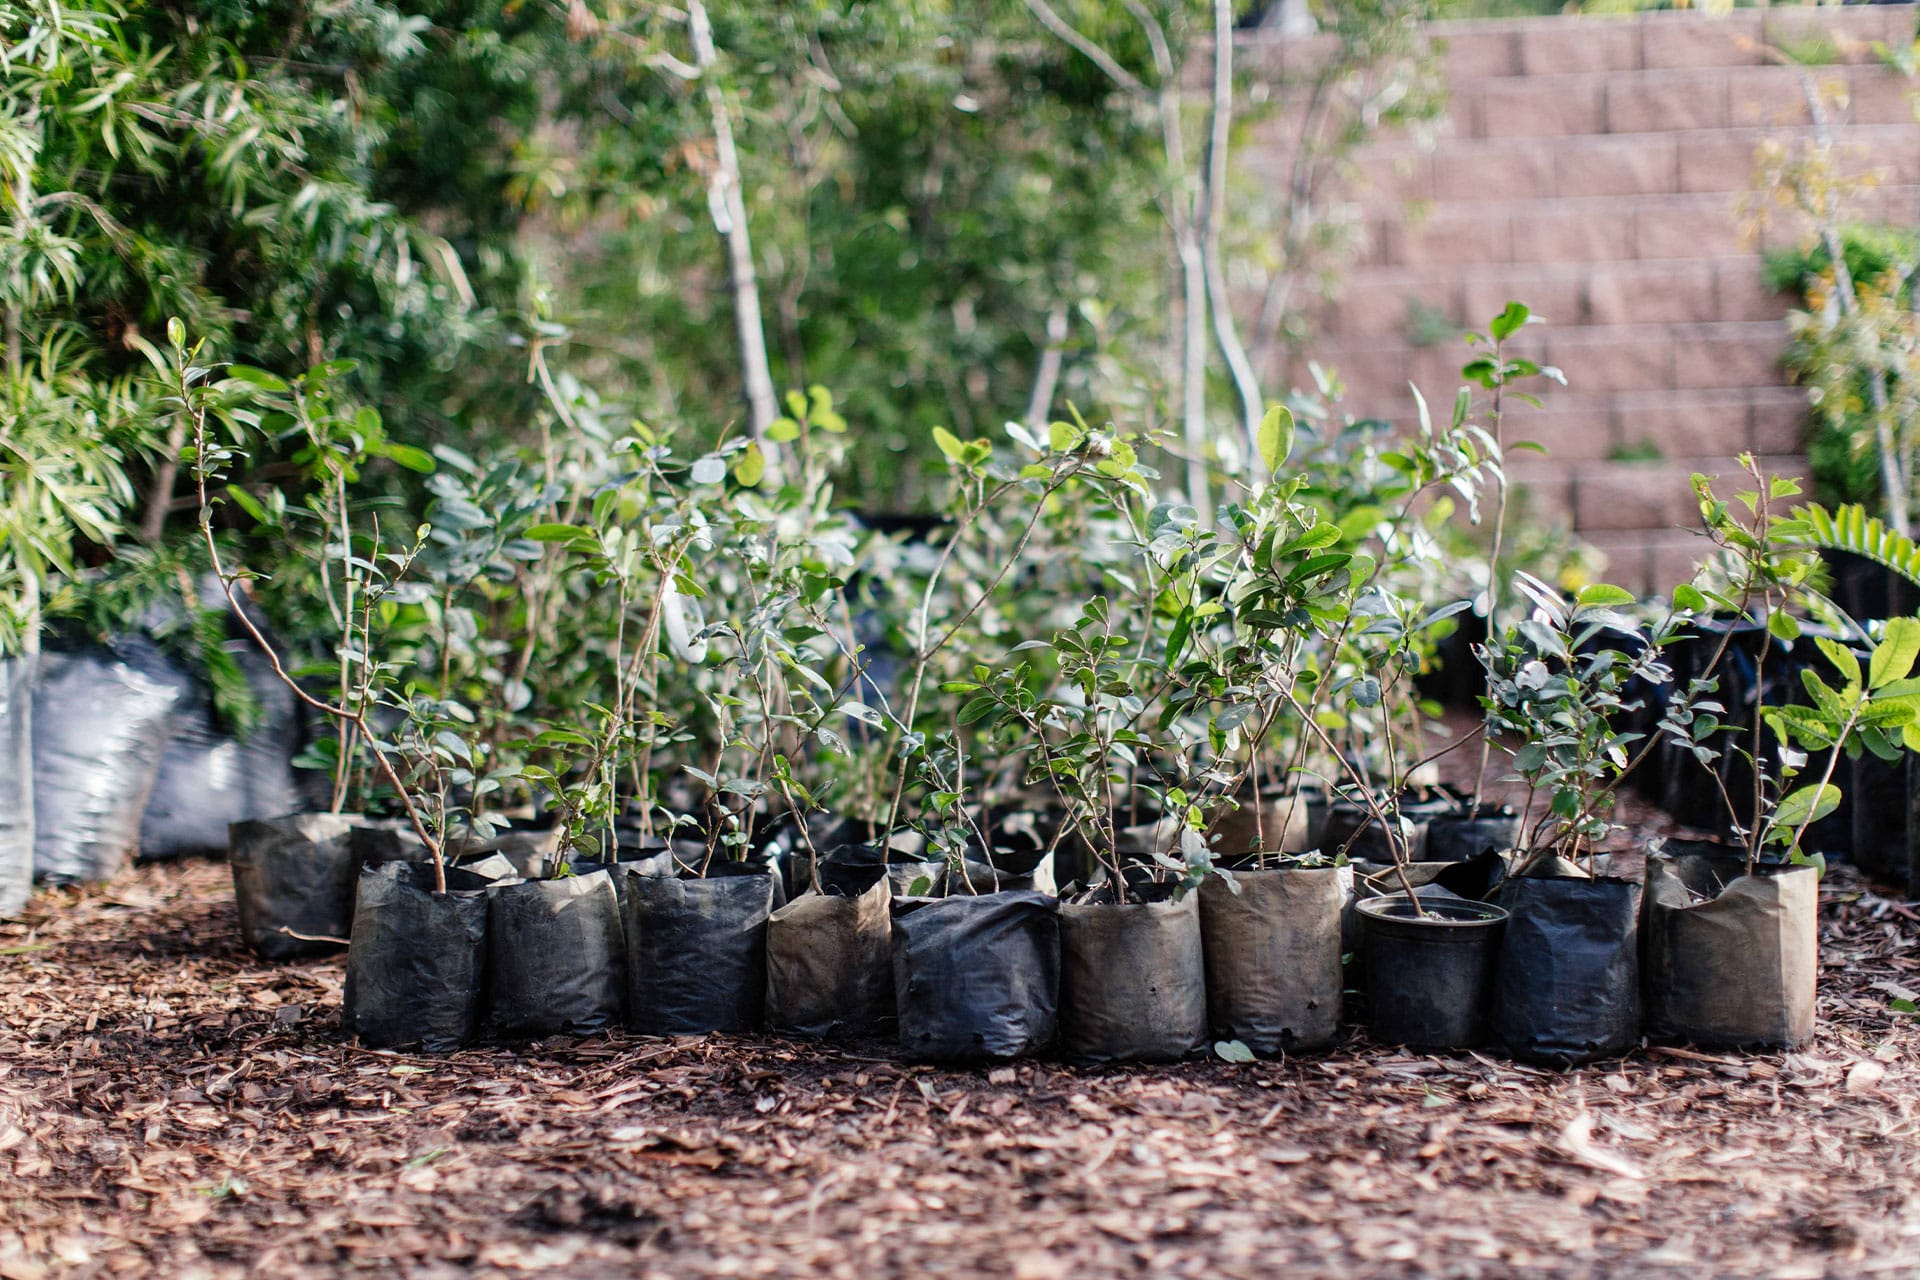 Young tree saplings waiting to be planted.